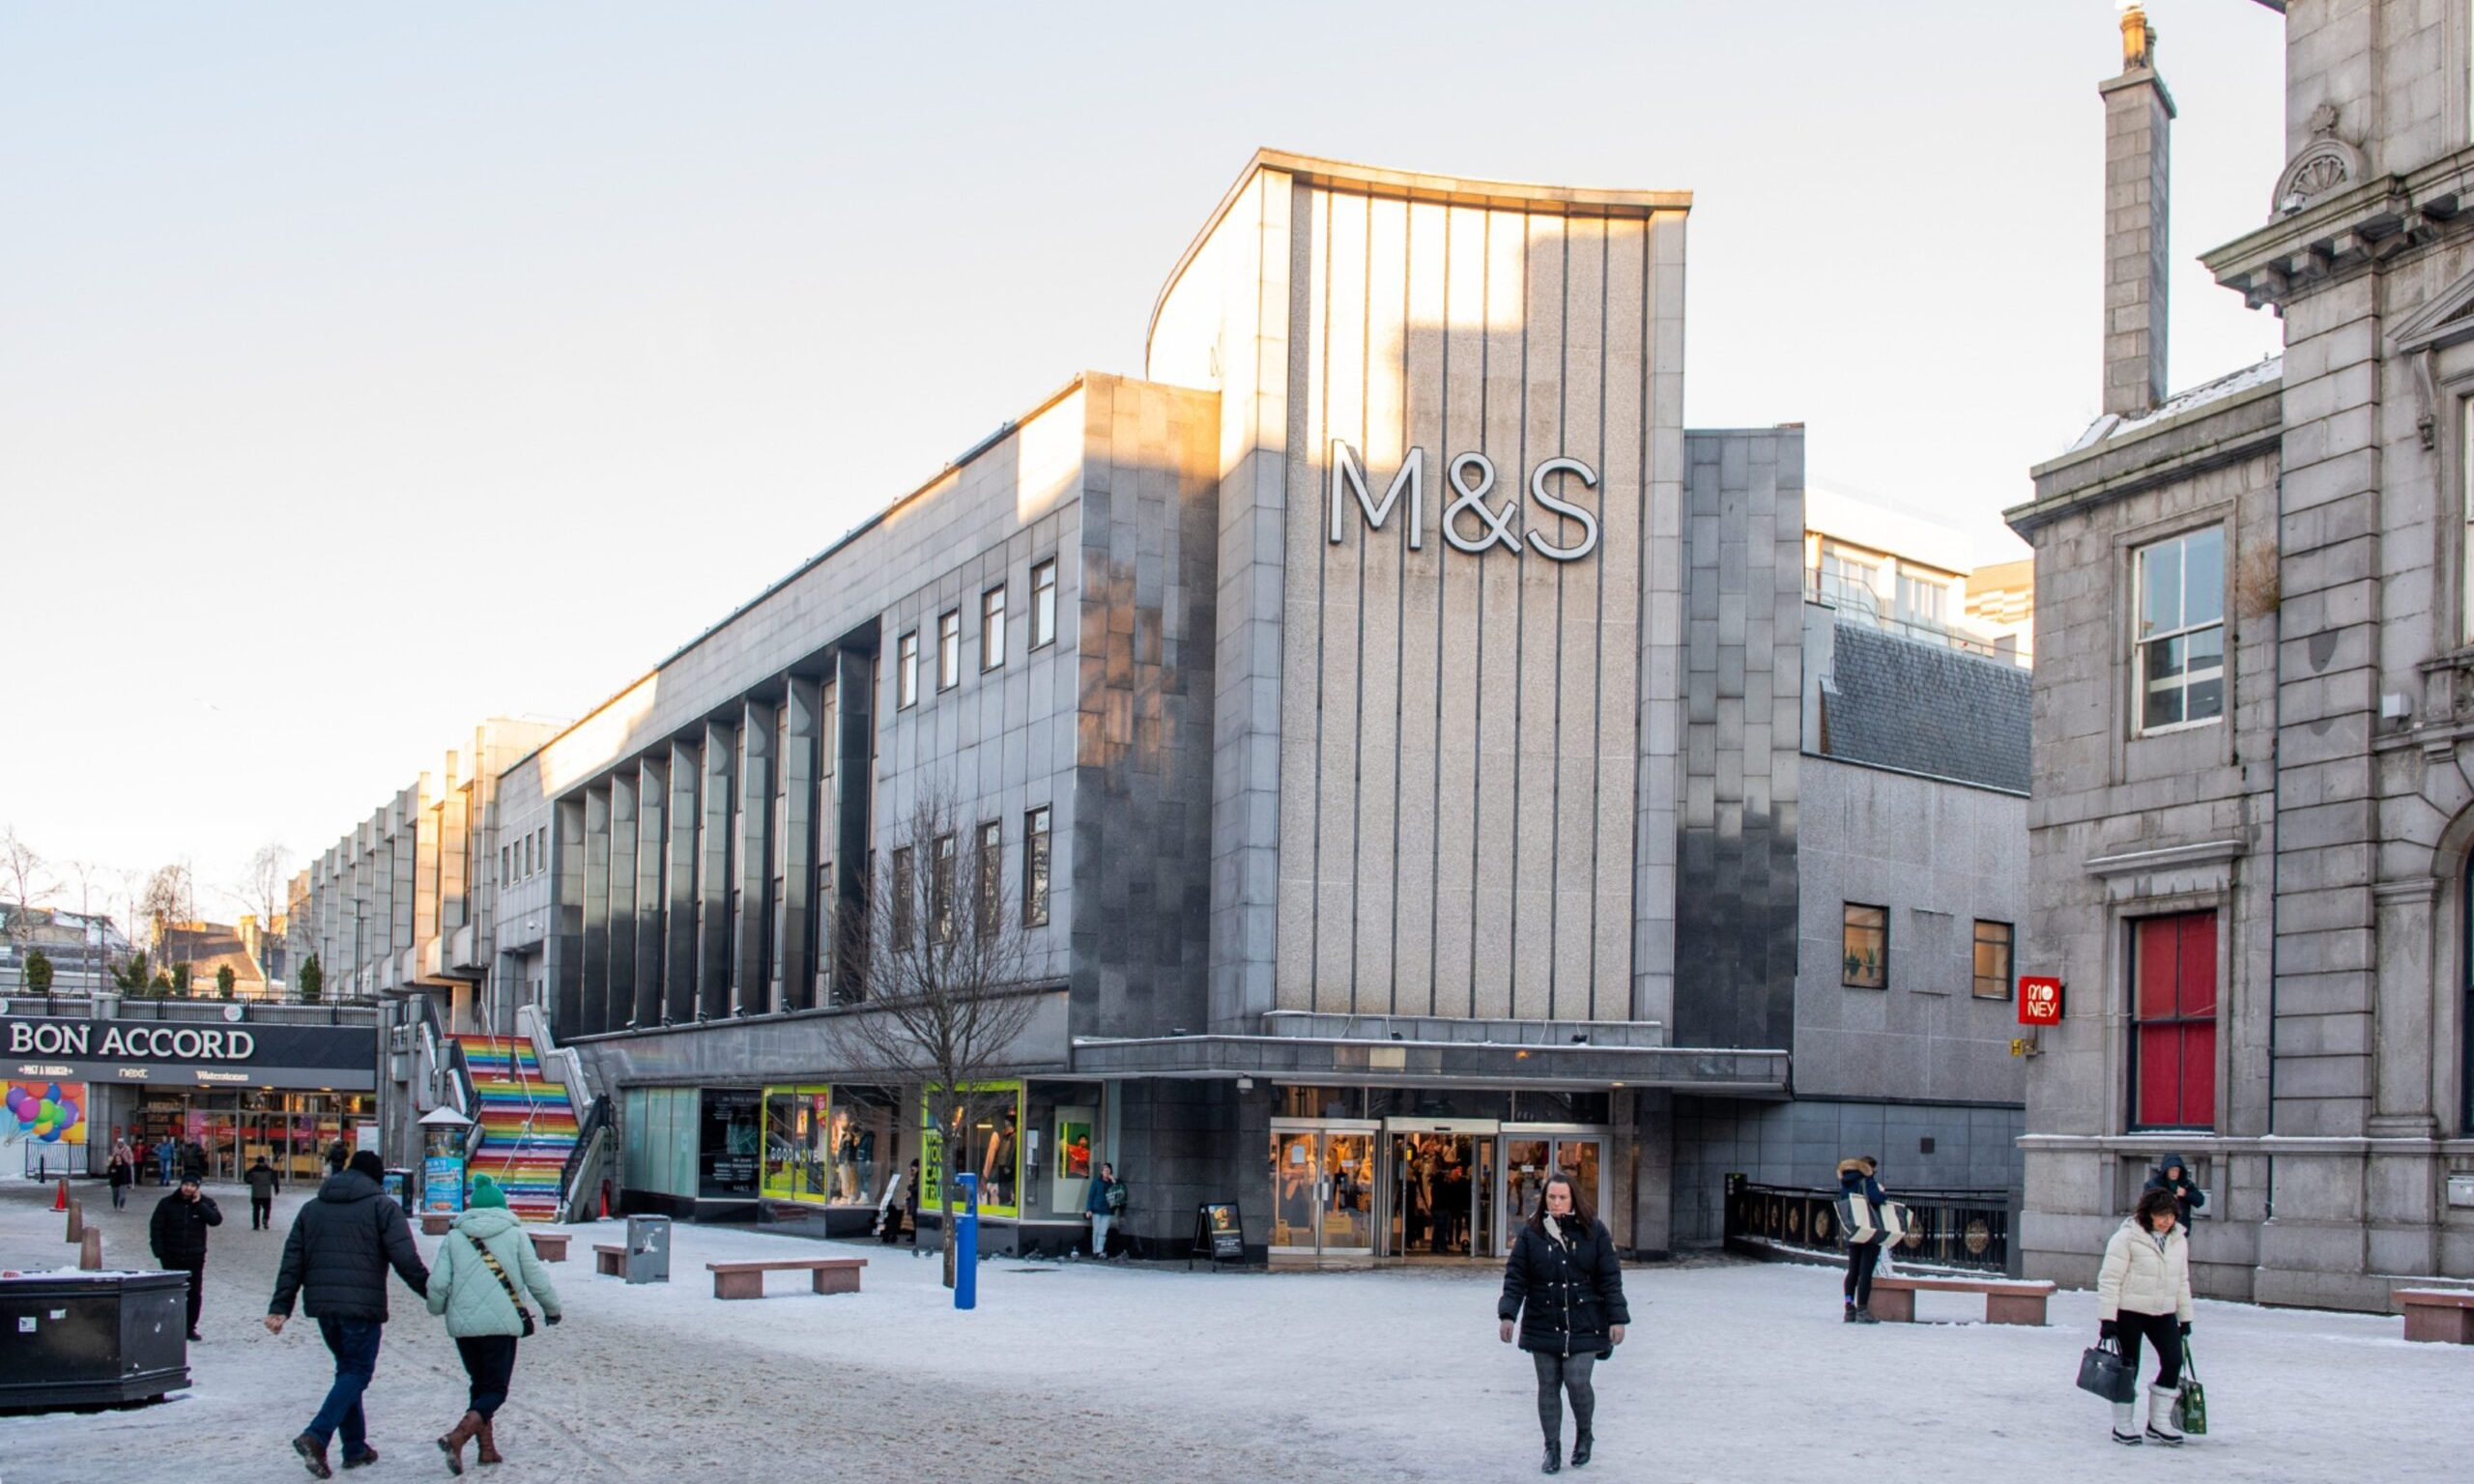 Aberdeen city centre M&S, which has announced closure.